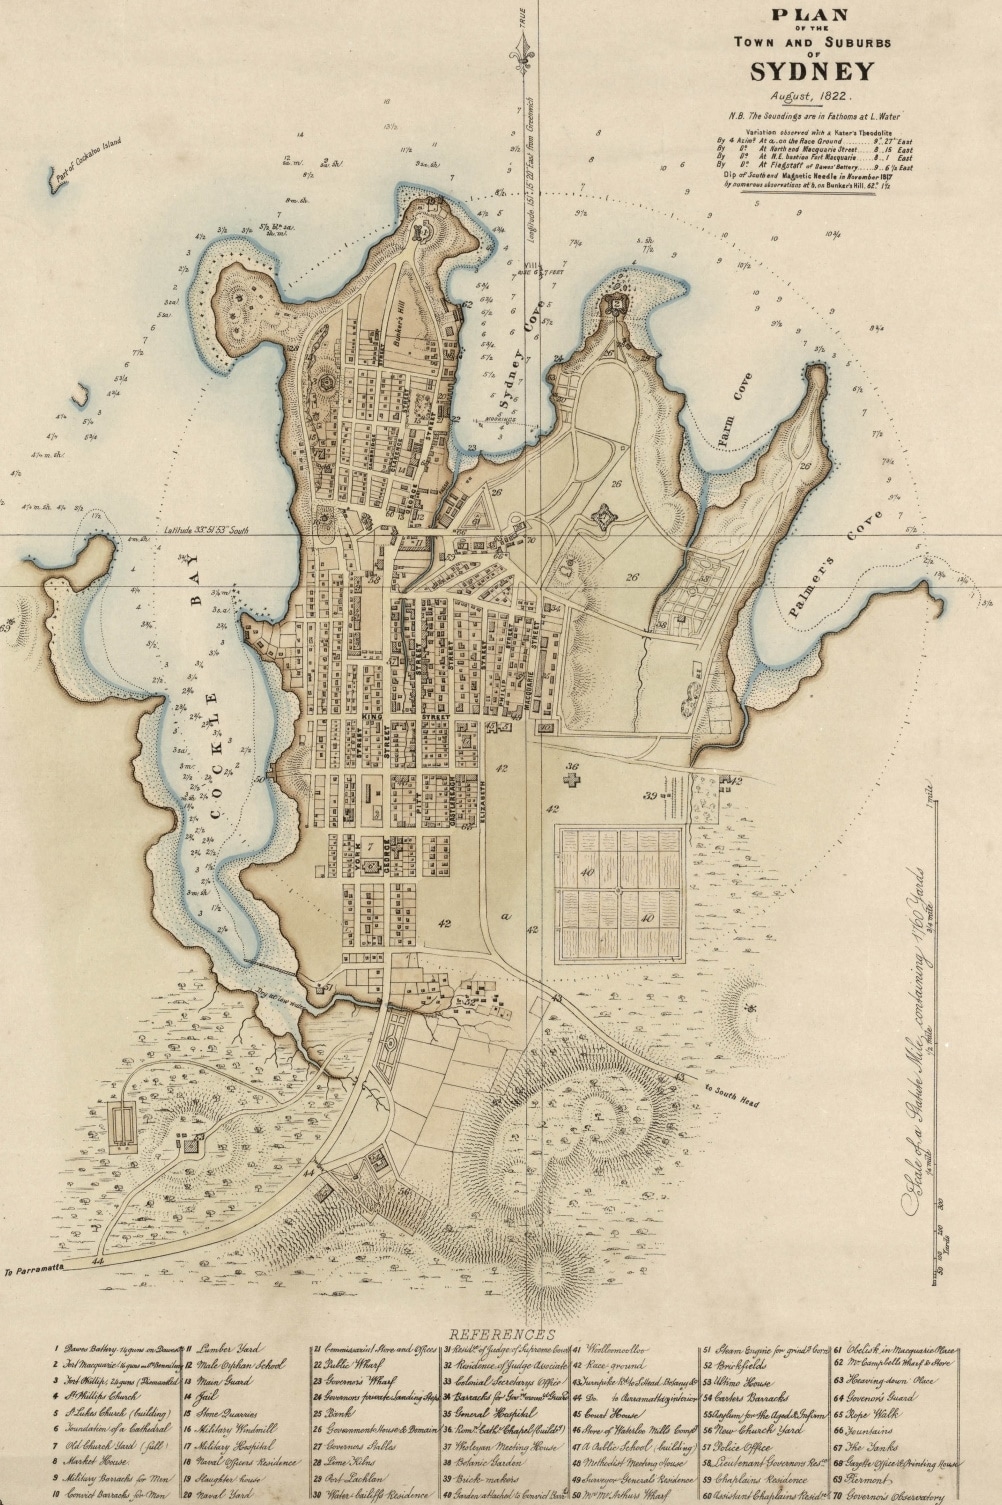 Plan of the town and suburbs of Sydney, August, 1822 ([?: ?, 1822])